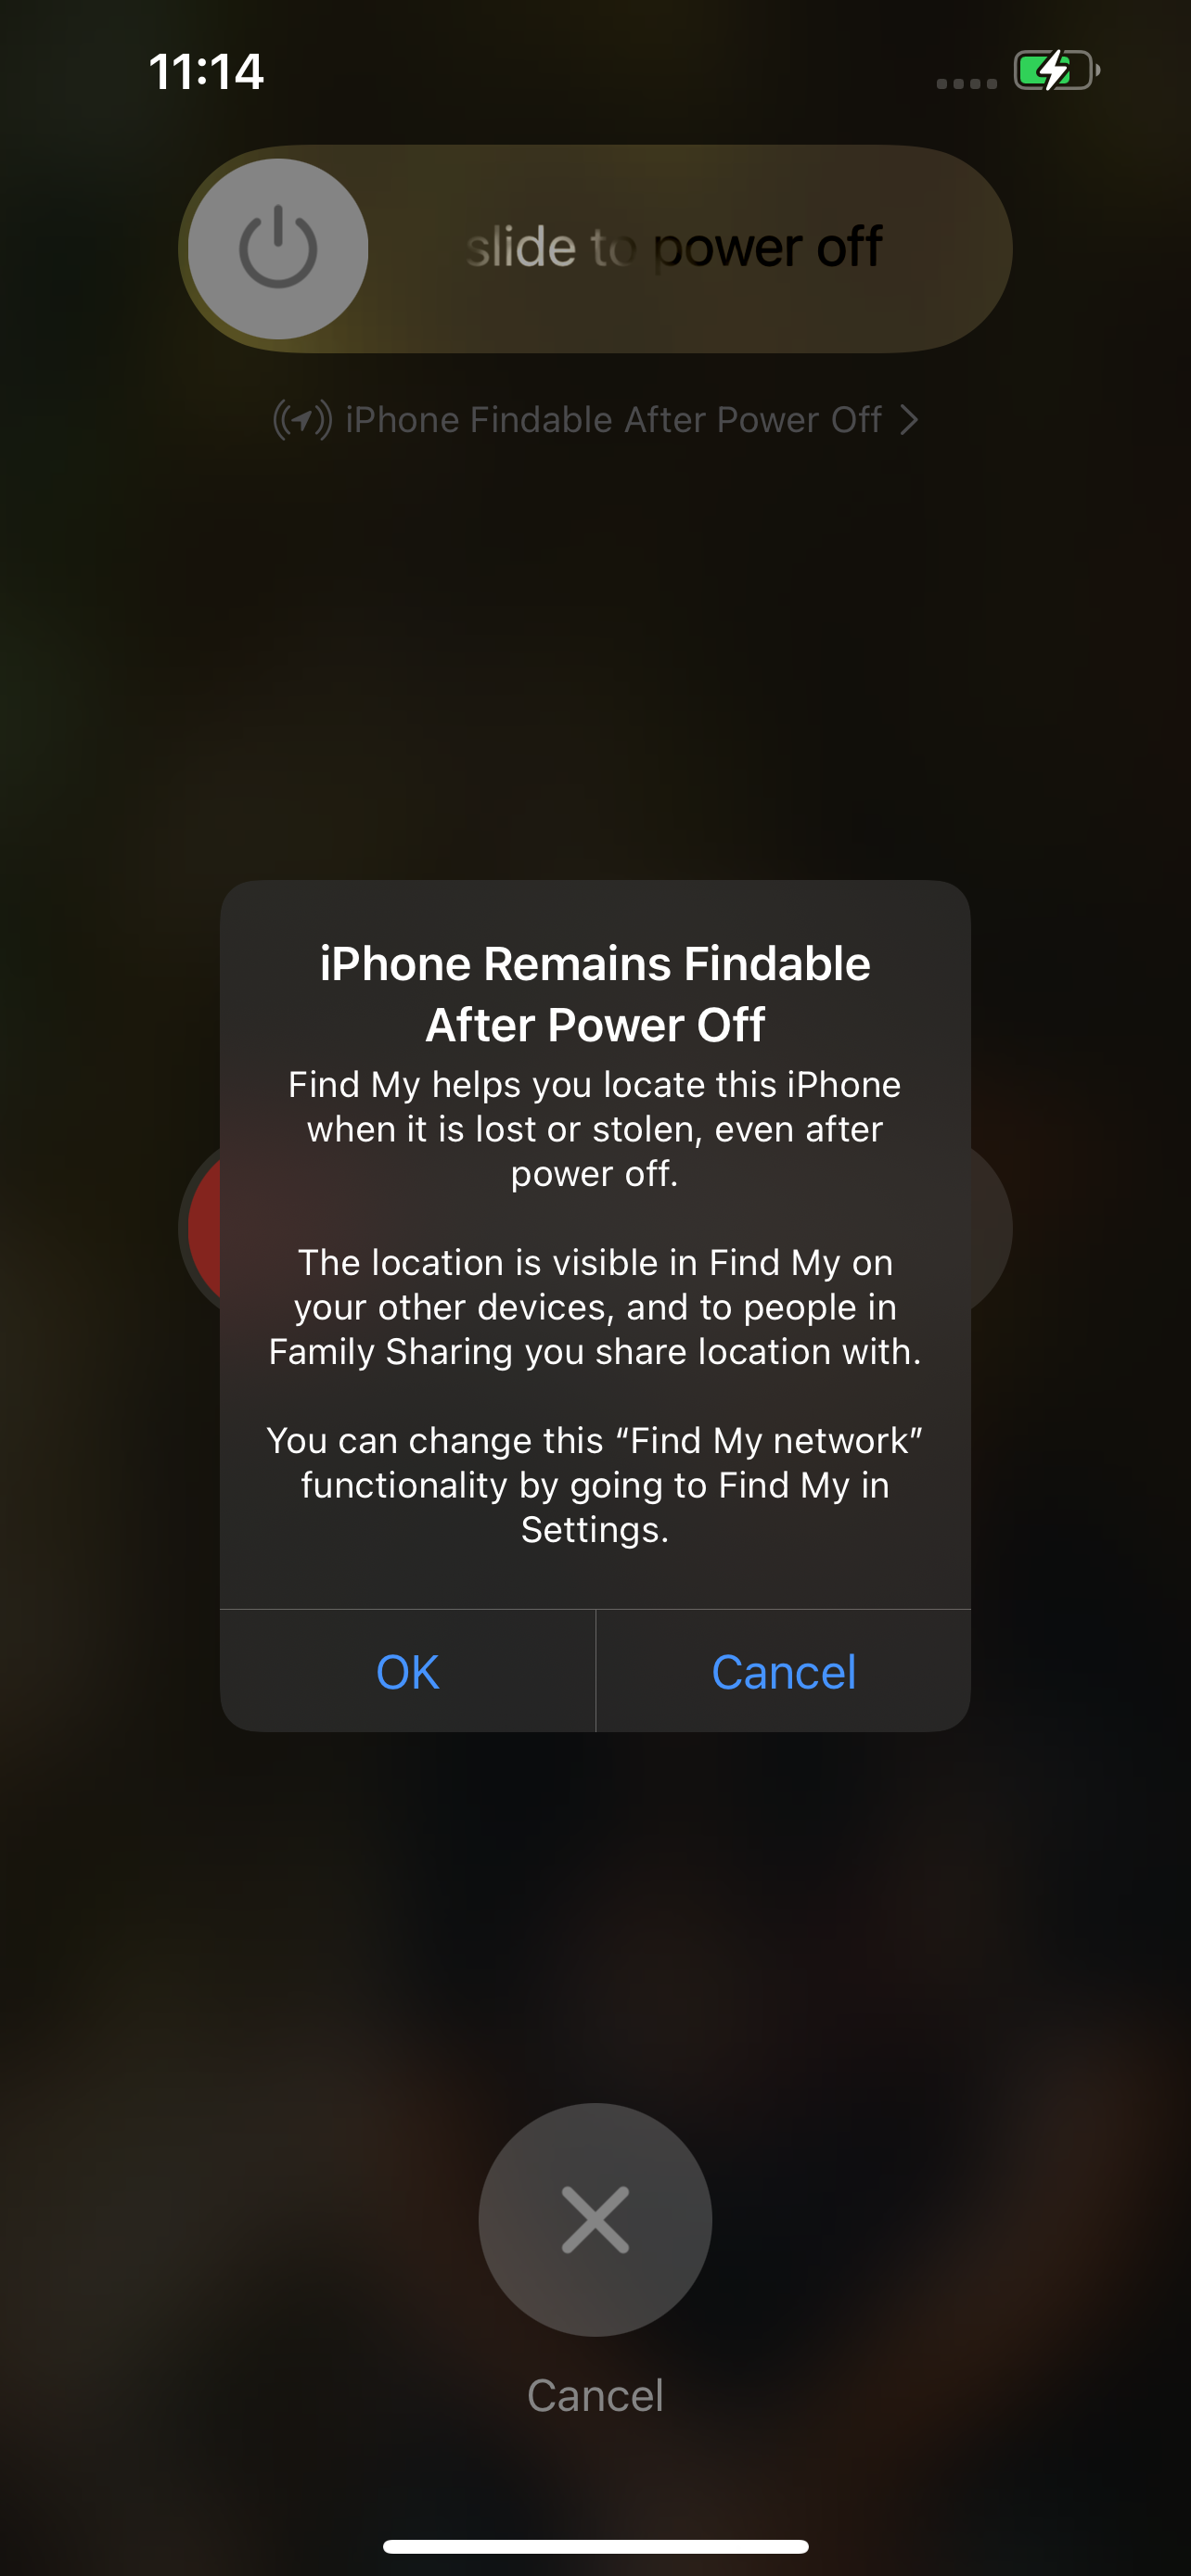 iphone findable when "off"